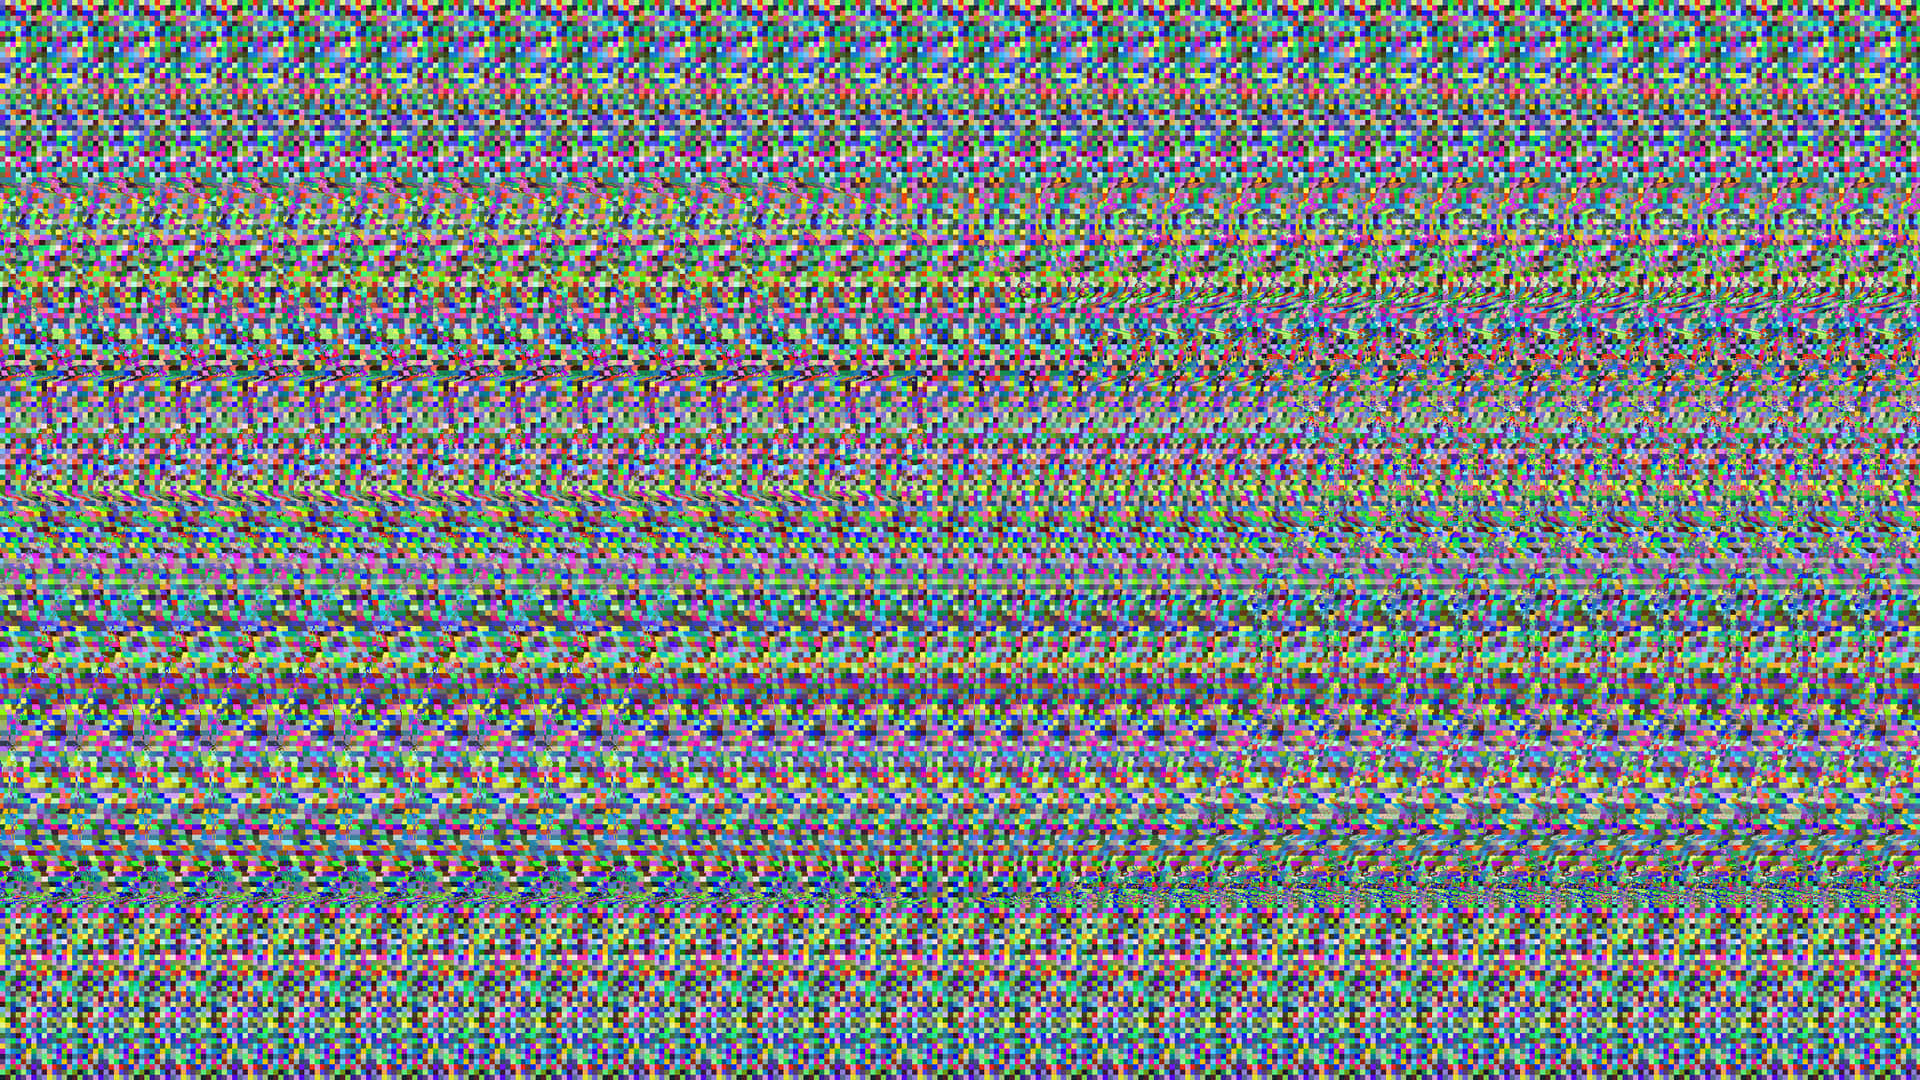 A Colorful Pixelated Pattern With A Rainbow Of Colors